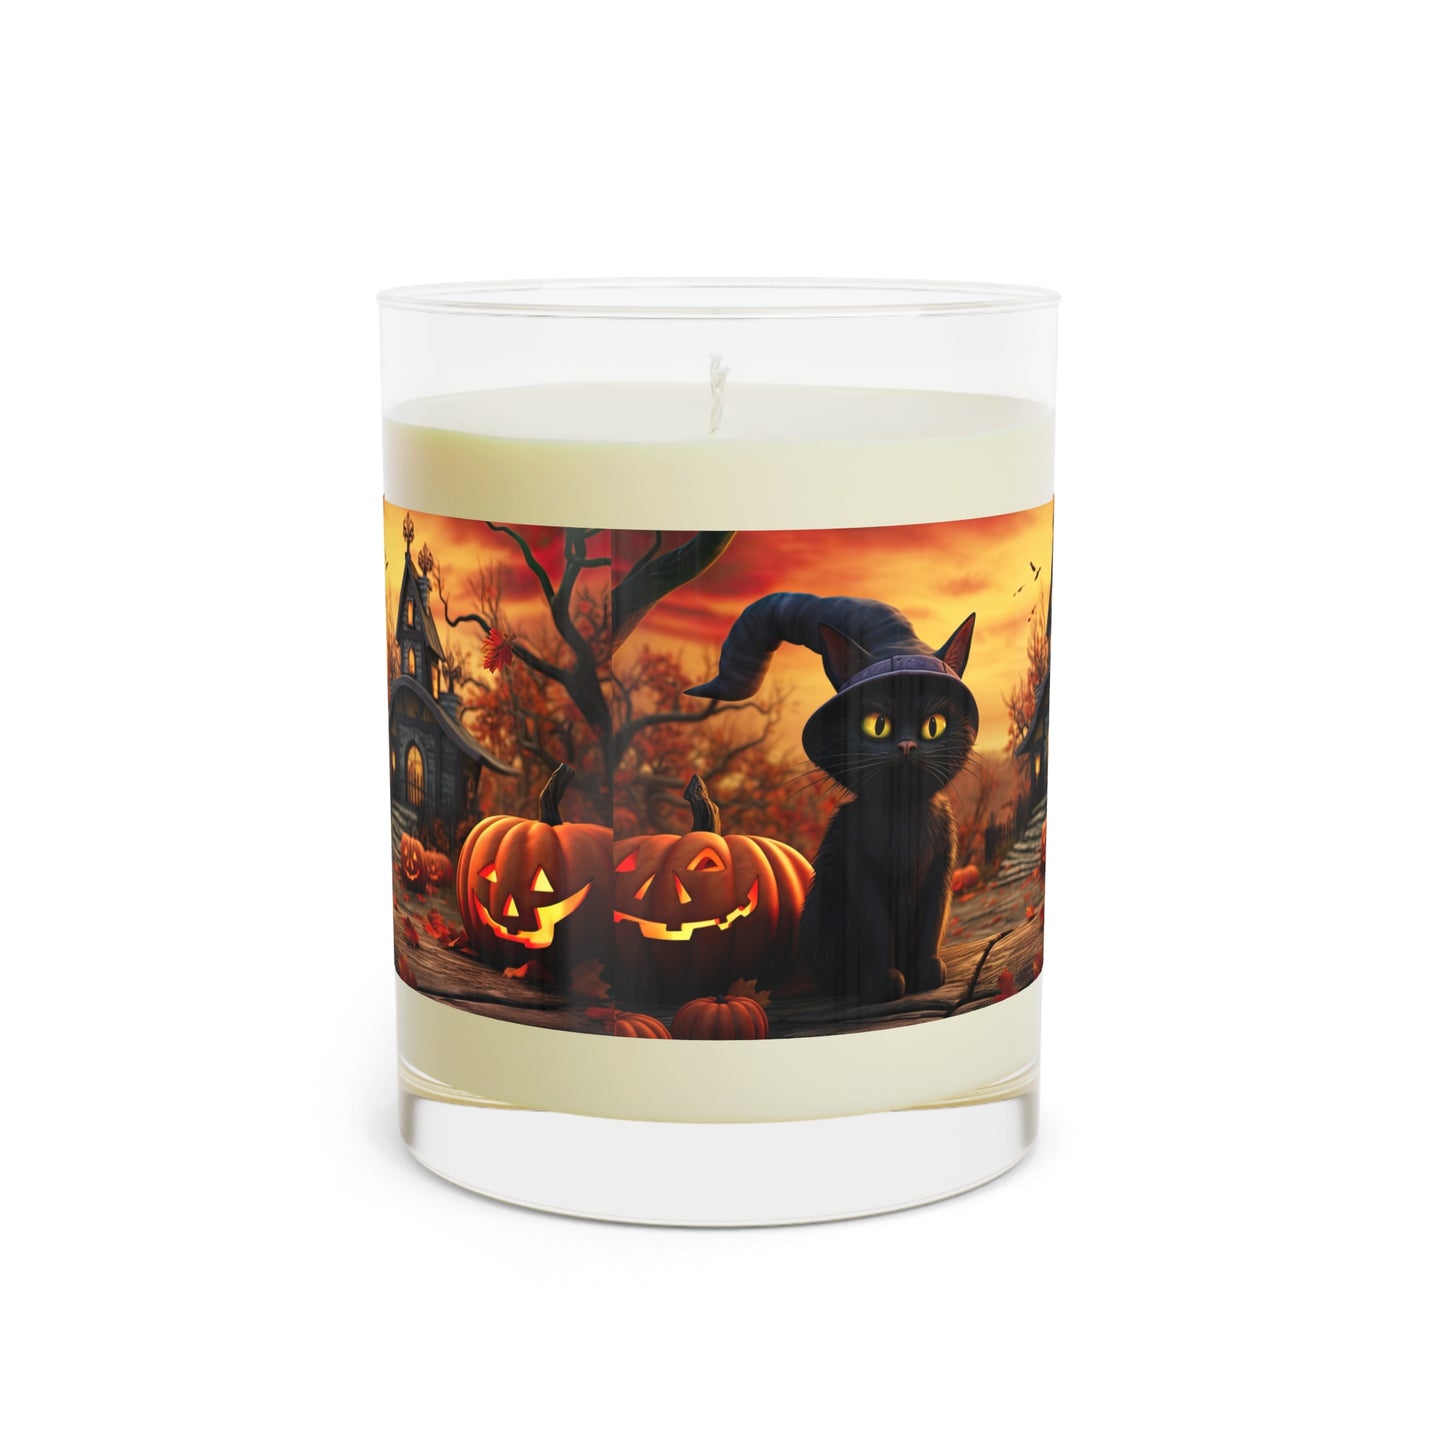 Witch Cat With Breathtaking Fall Time Schoolhouse/Church With Smile Carved Halloween Pumpkins , Scented Candle - Full Glass, 11oz